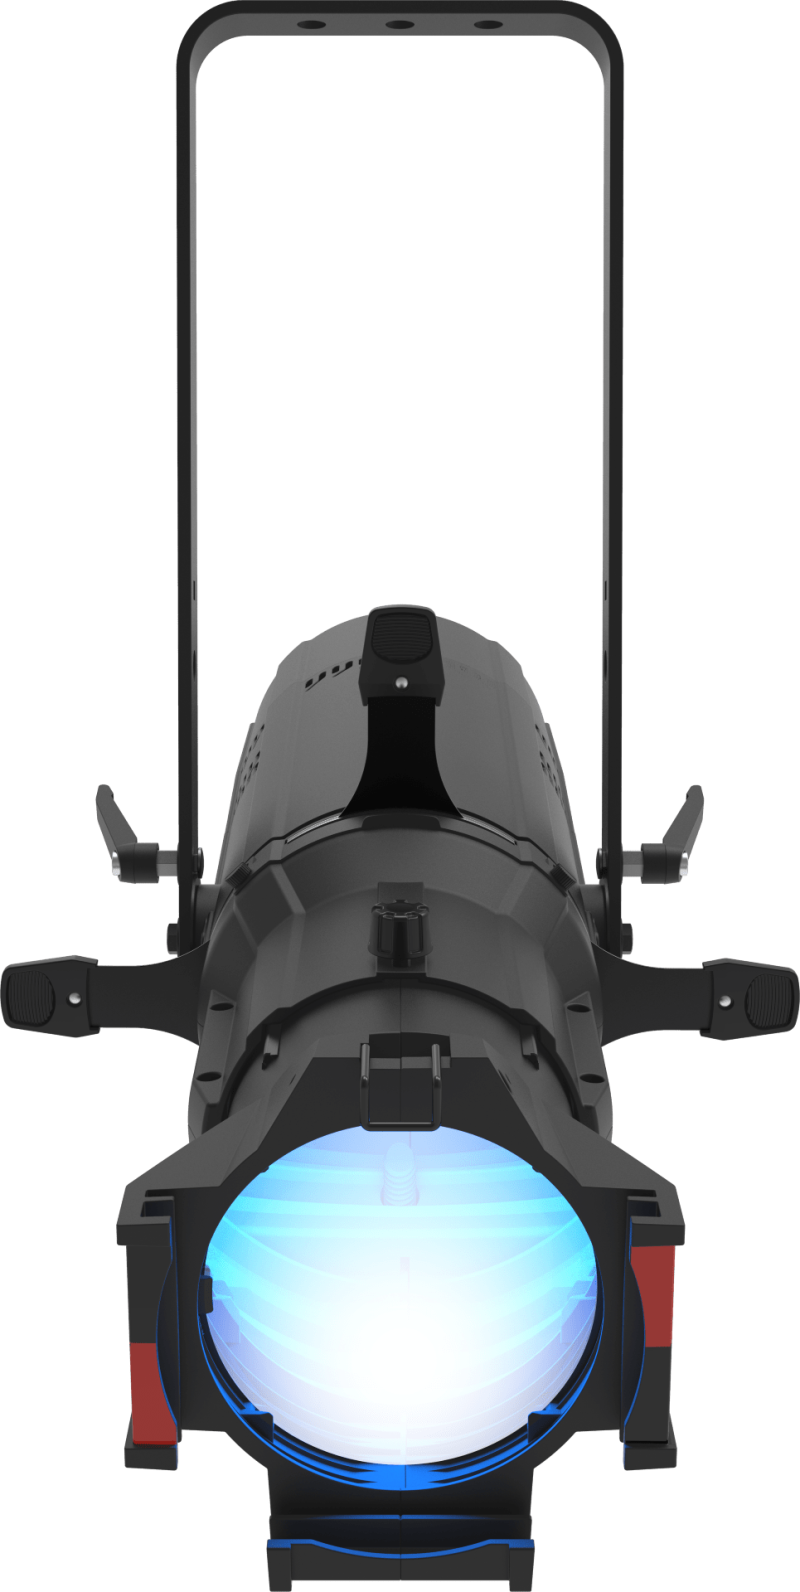 Front view of LED ERS-style lighting fixture